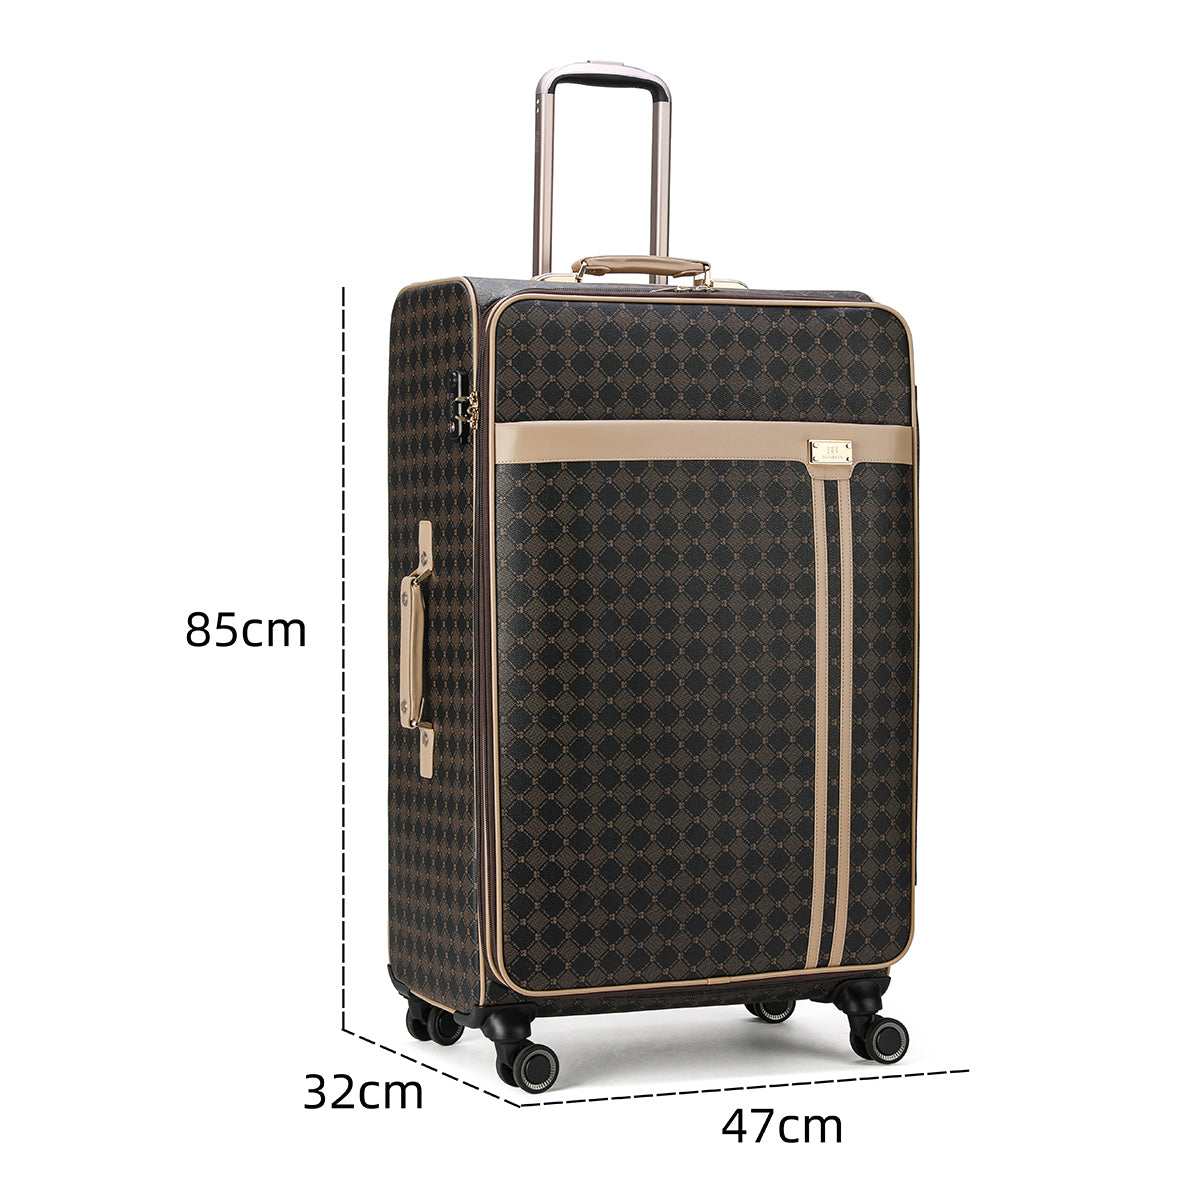 Luxurious travel bag with wheels and metal handle, several sizes, brown color